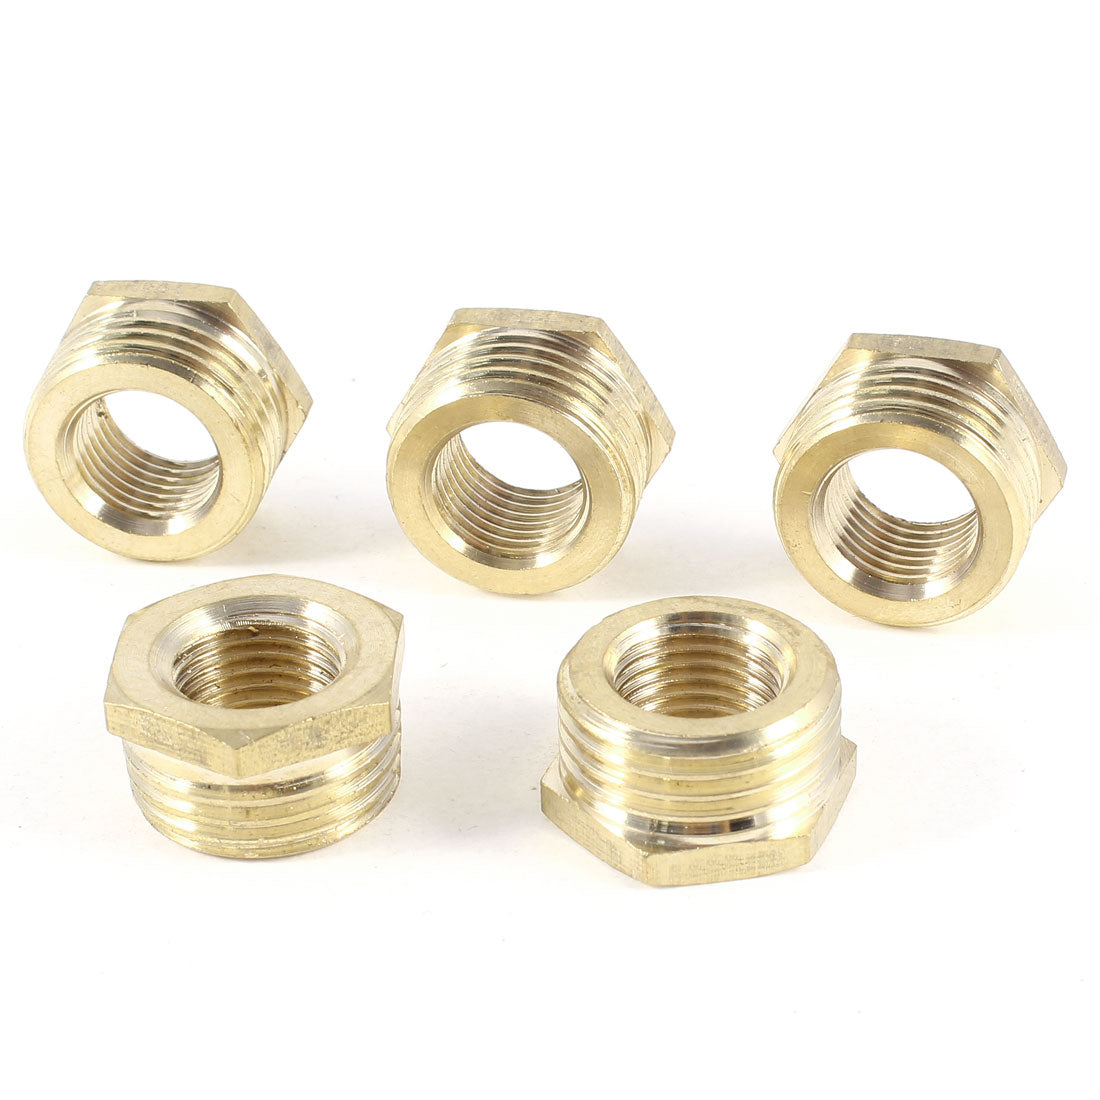 uxcell Uxcell 5 Pcs 1/2 PT Male x 1/4 PT Female Thread Brass Hex Bushing Pipe Fitting Adapter